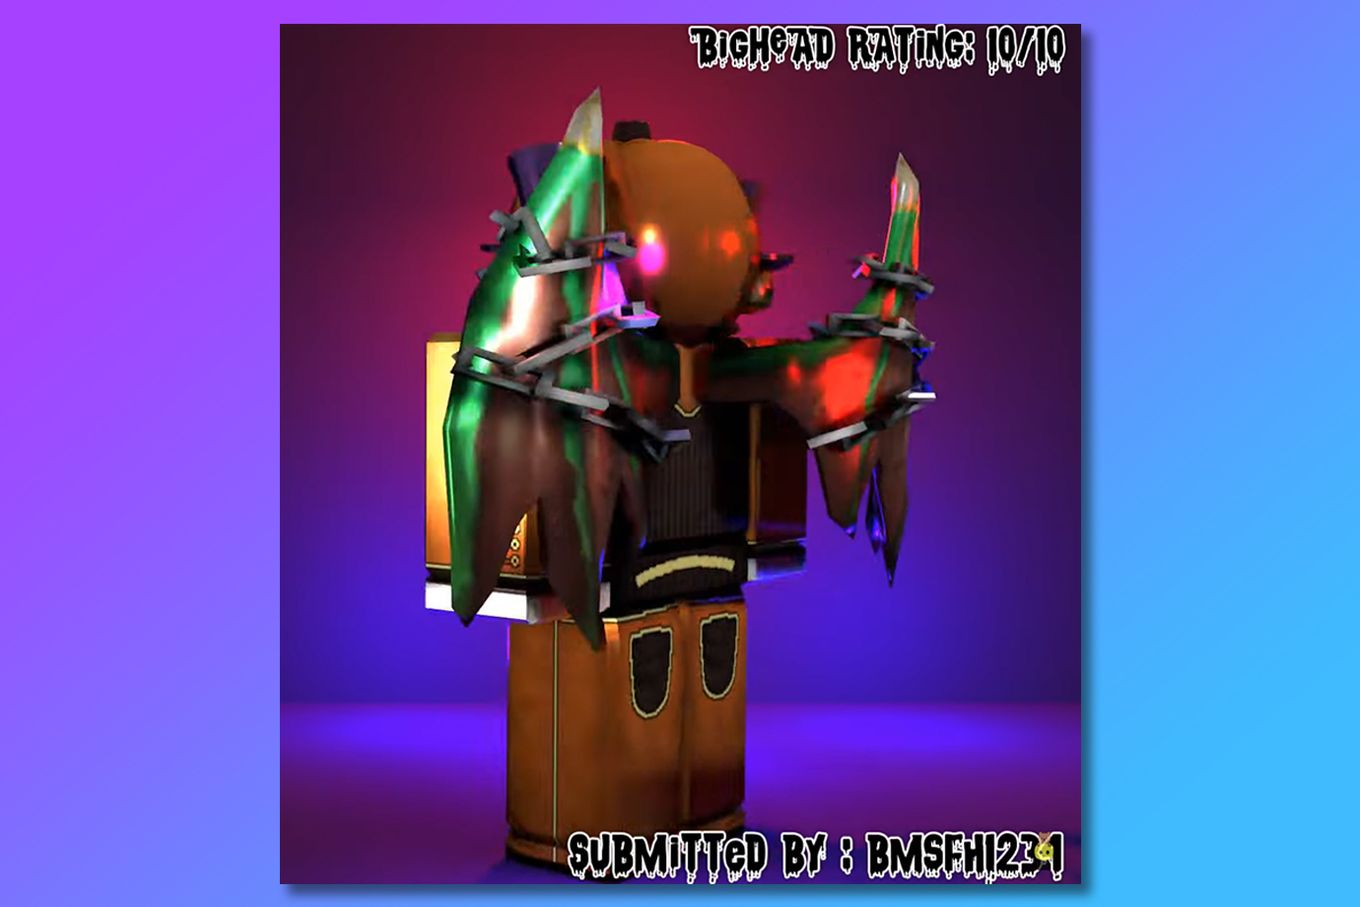 15 Cool Roblox Avatar Ideas This 2023 [You'll Love To Use